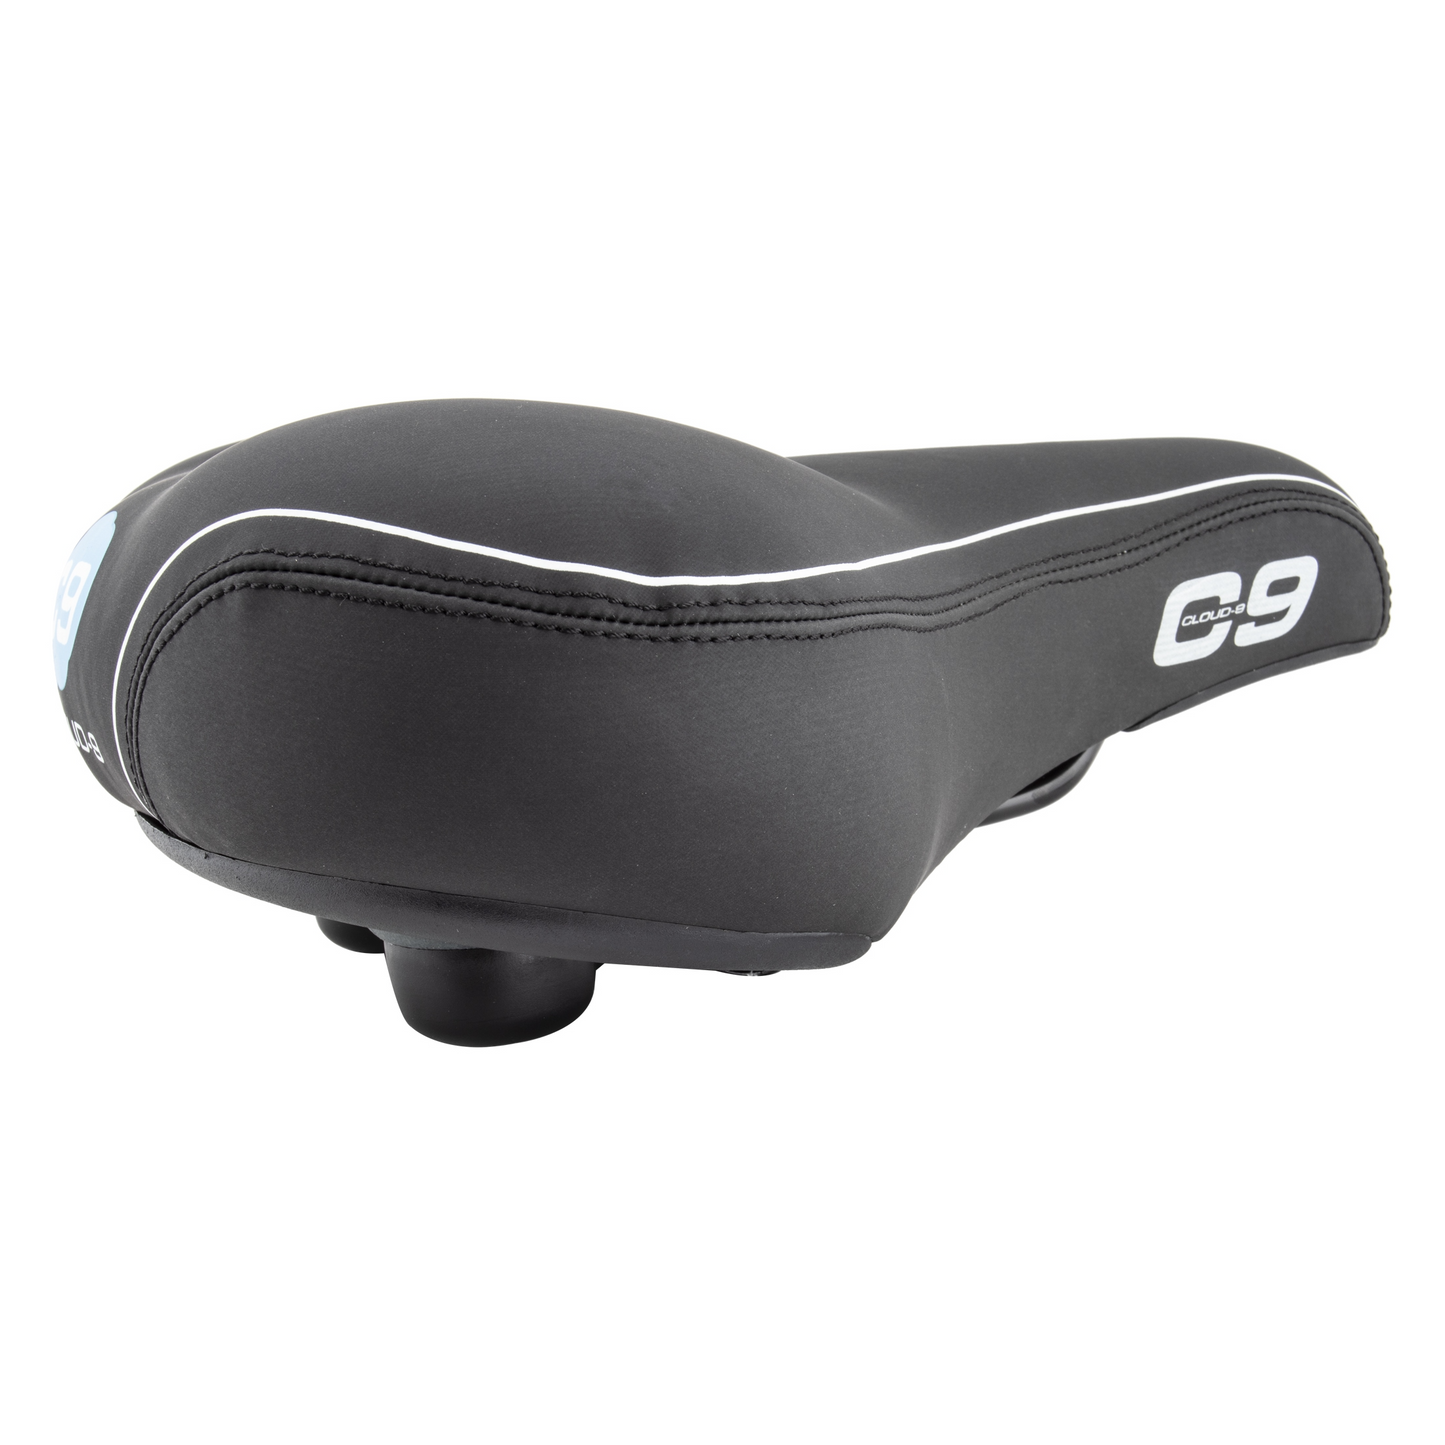 A black and white CLOUD-9 Cruiser Select bike seat with a white stripe, featuring an anatomic relief design and a soft touch vinyl cover.